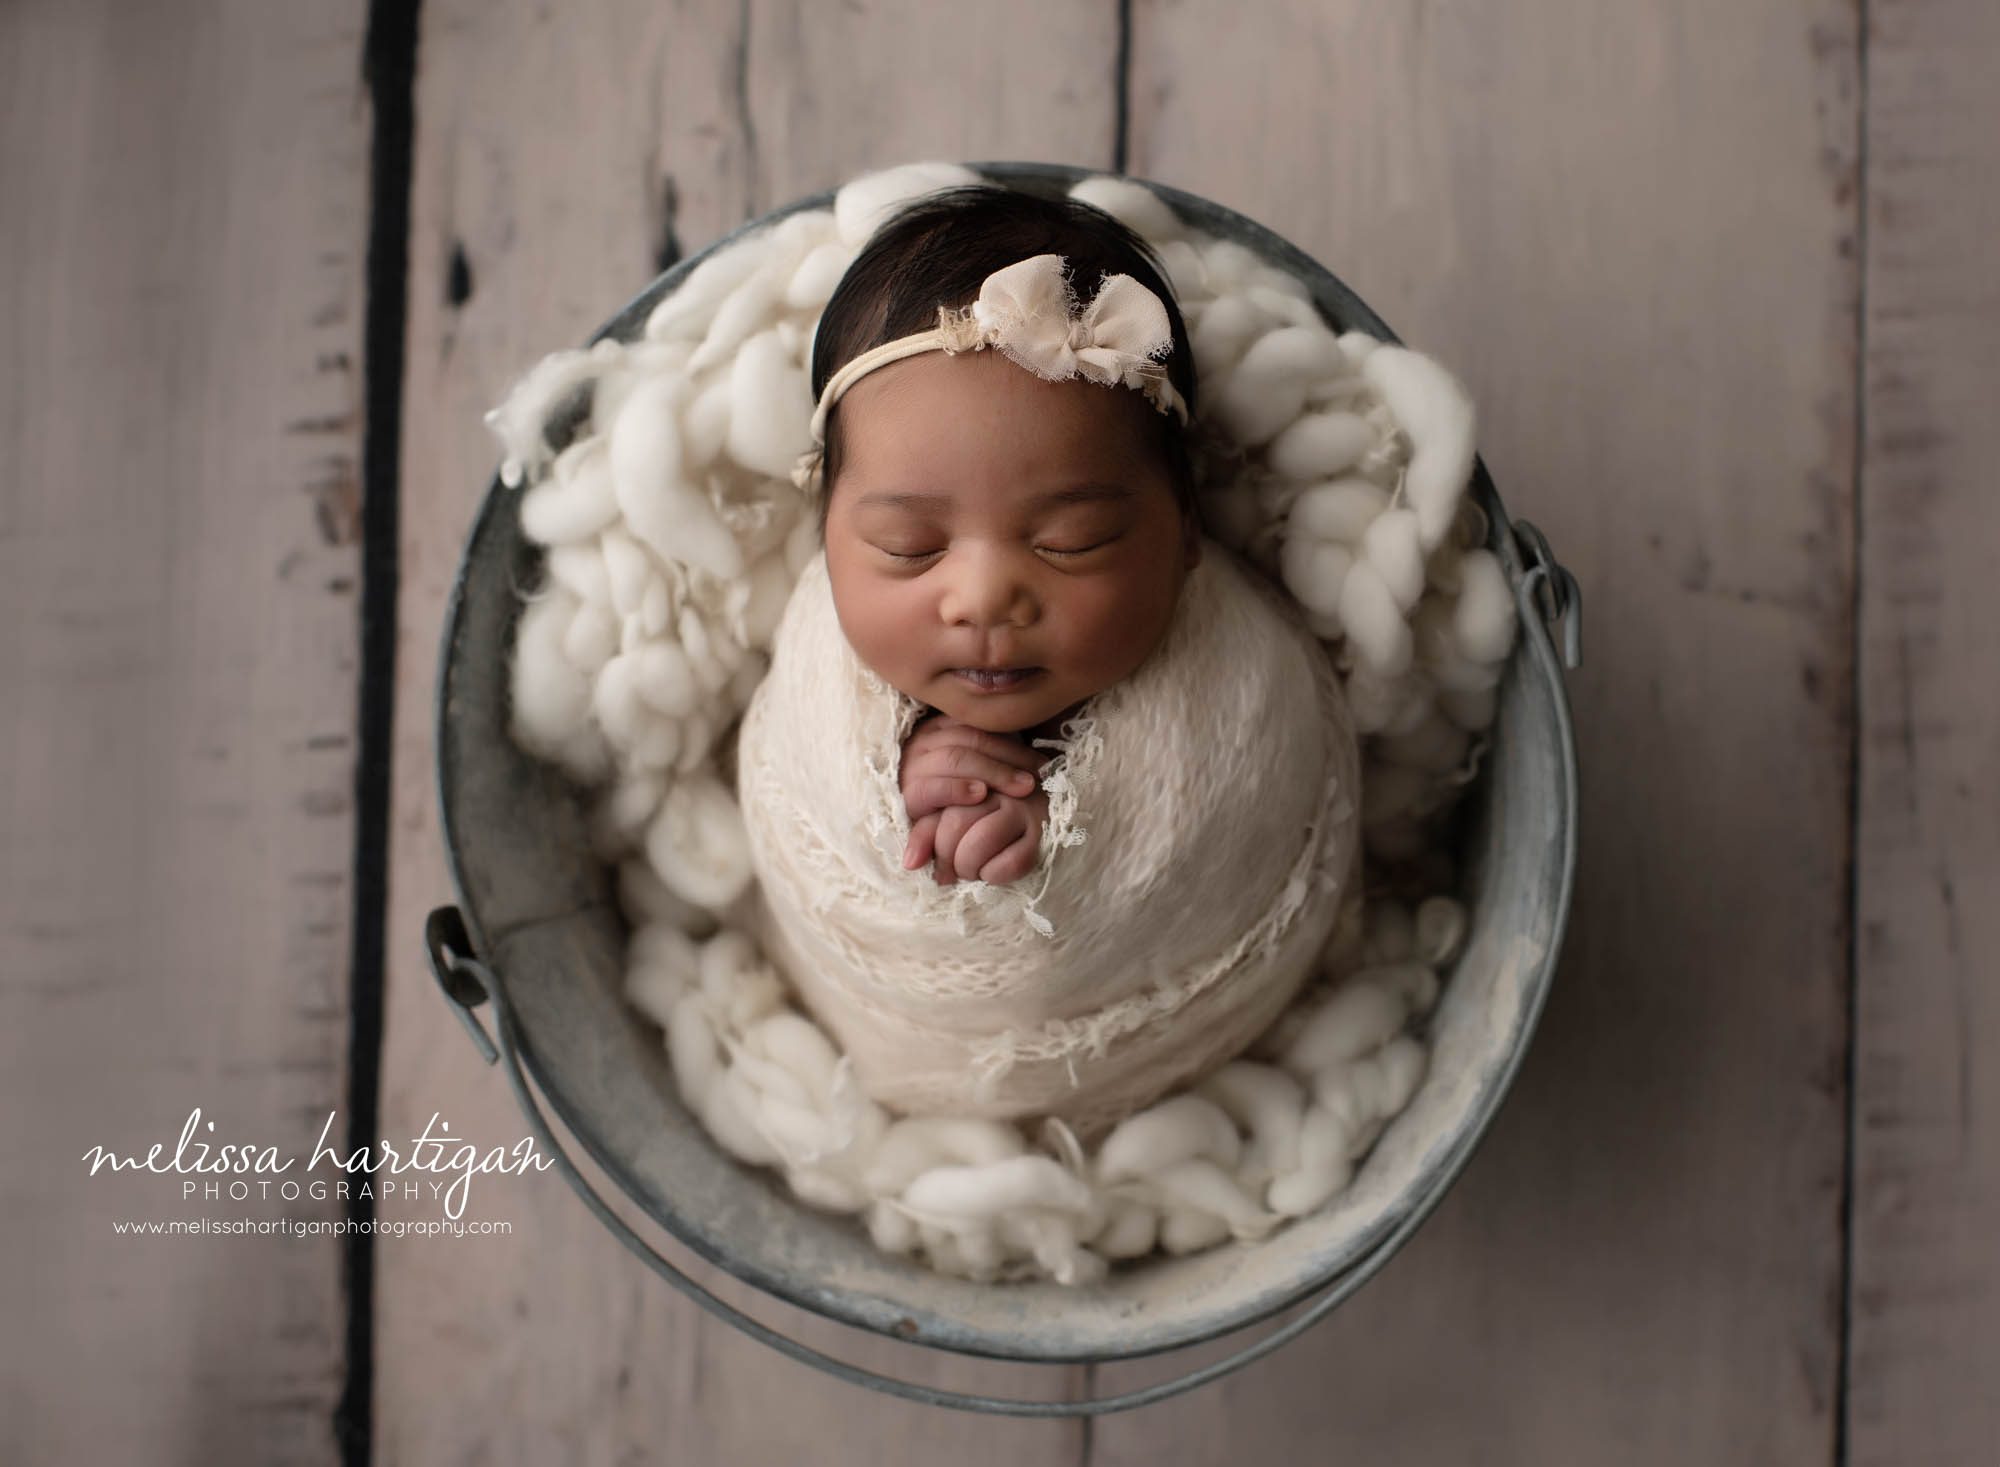 baby girl wrapped posed in bucket in cream colors and knitted layers